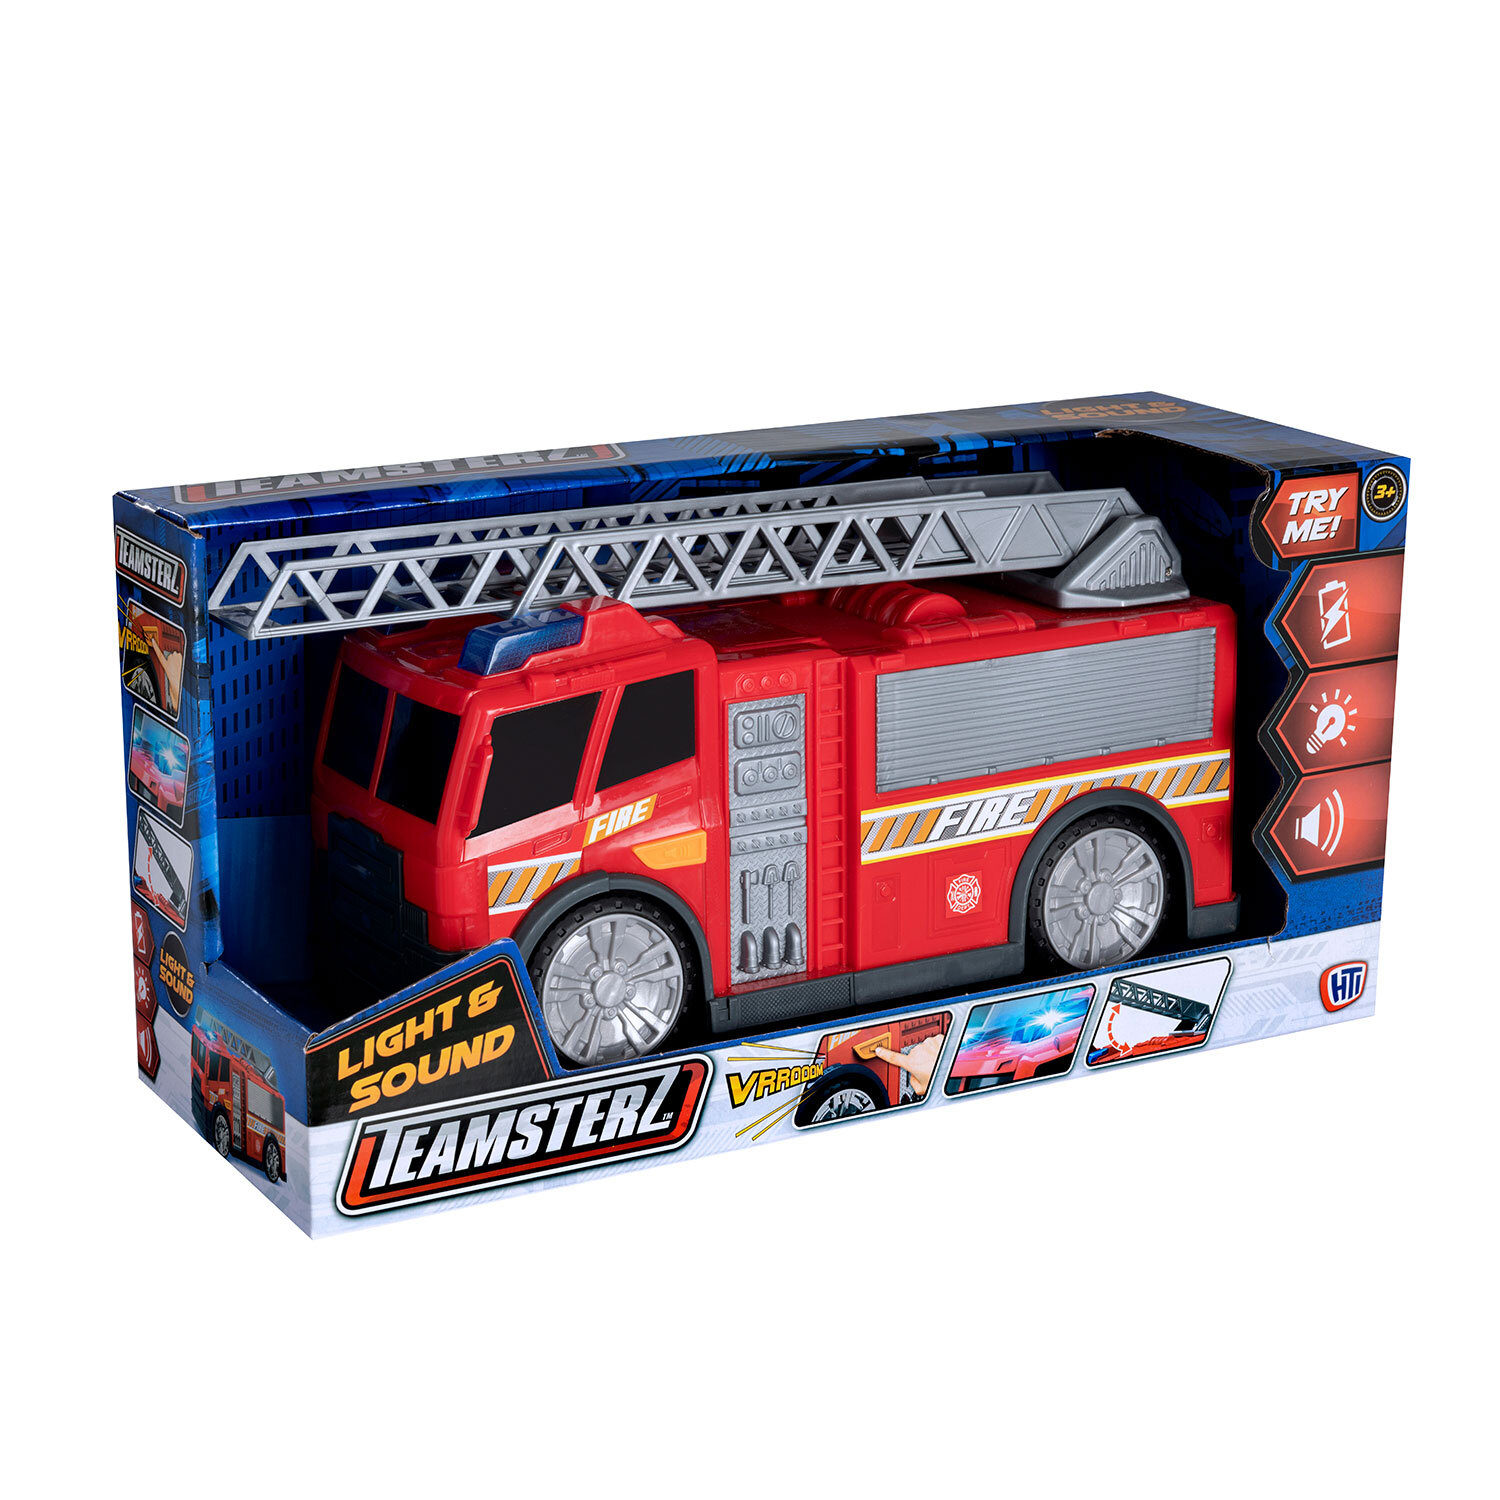 Single Teamsterz Light and Sound Fire Engine Toy in Assorted sizes Image